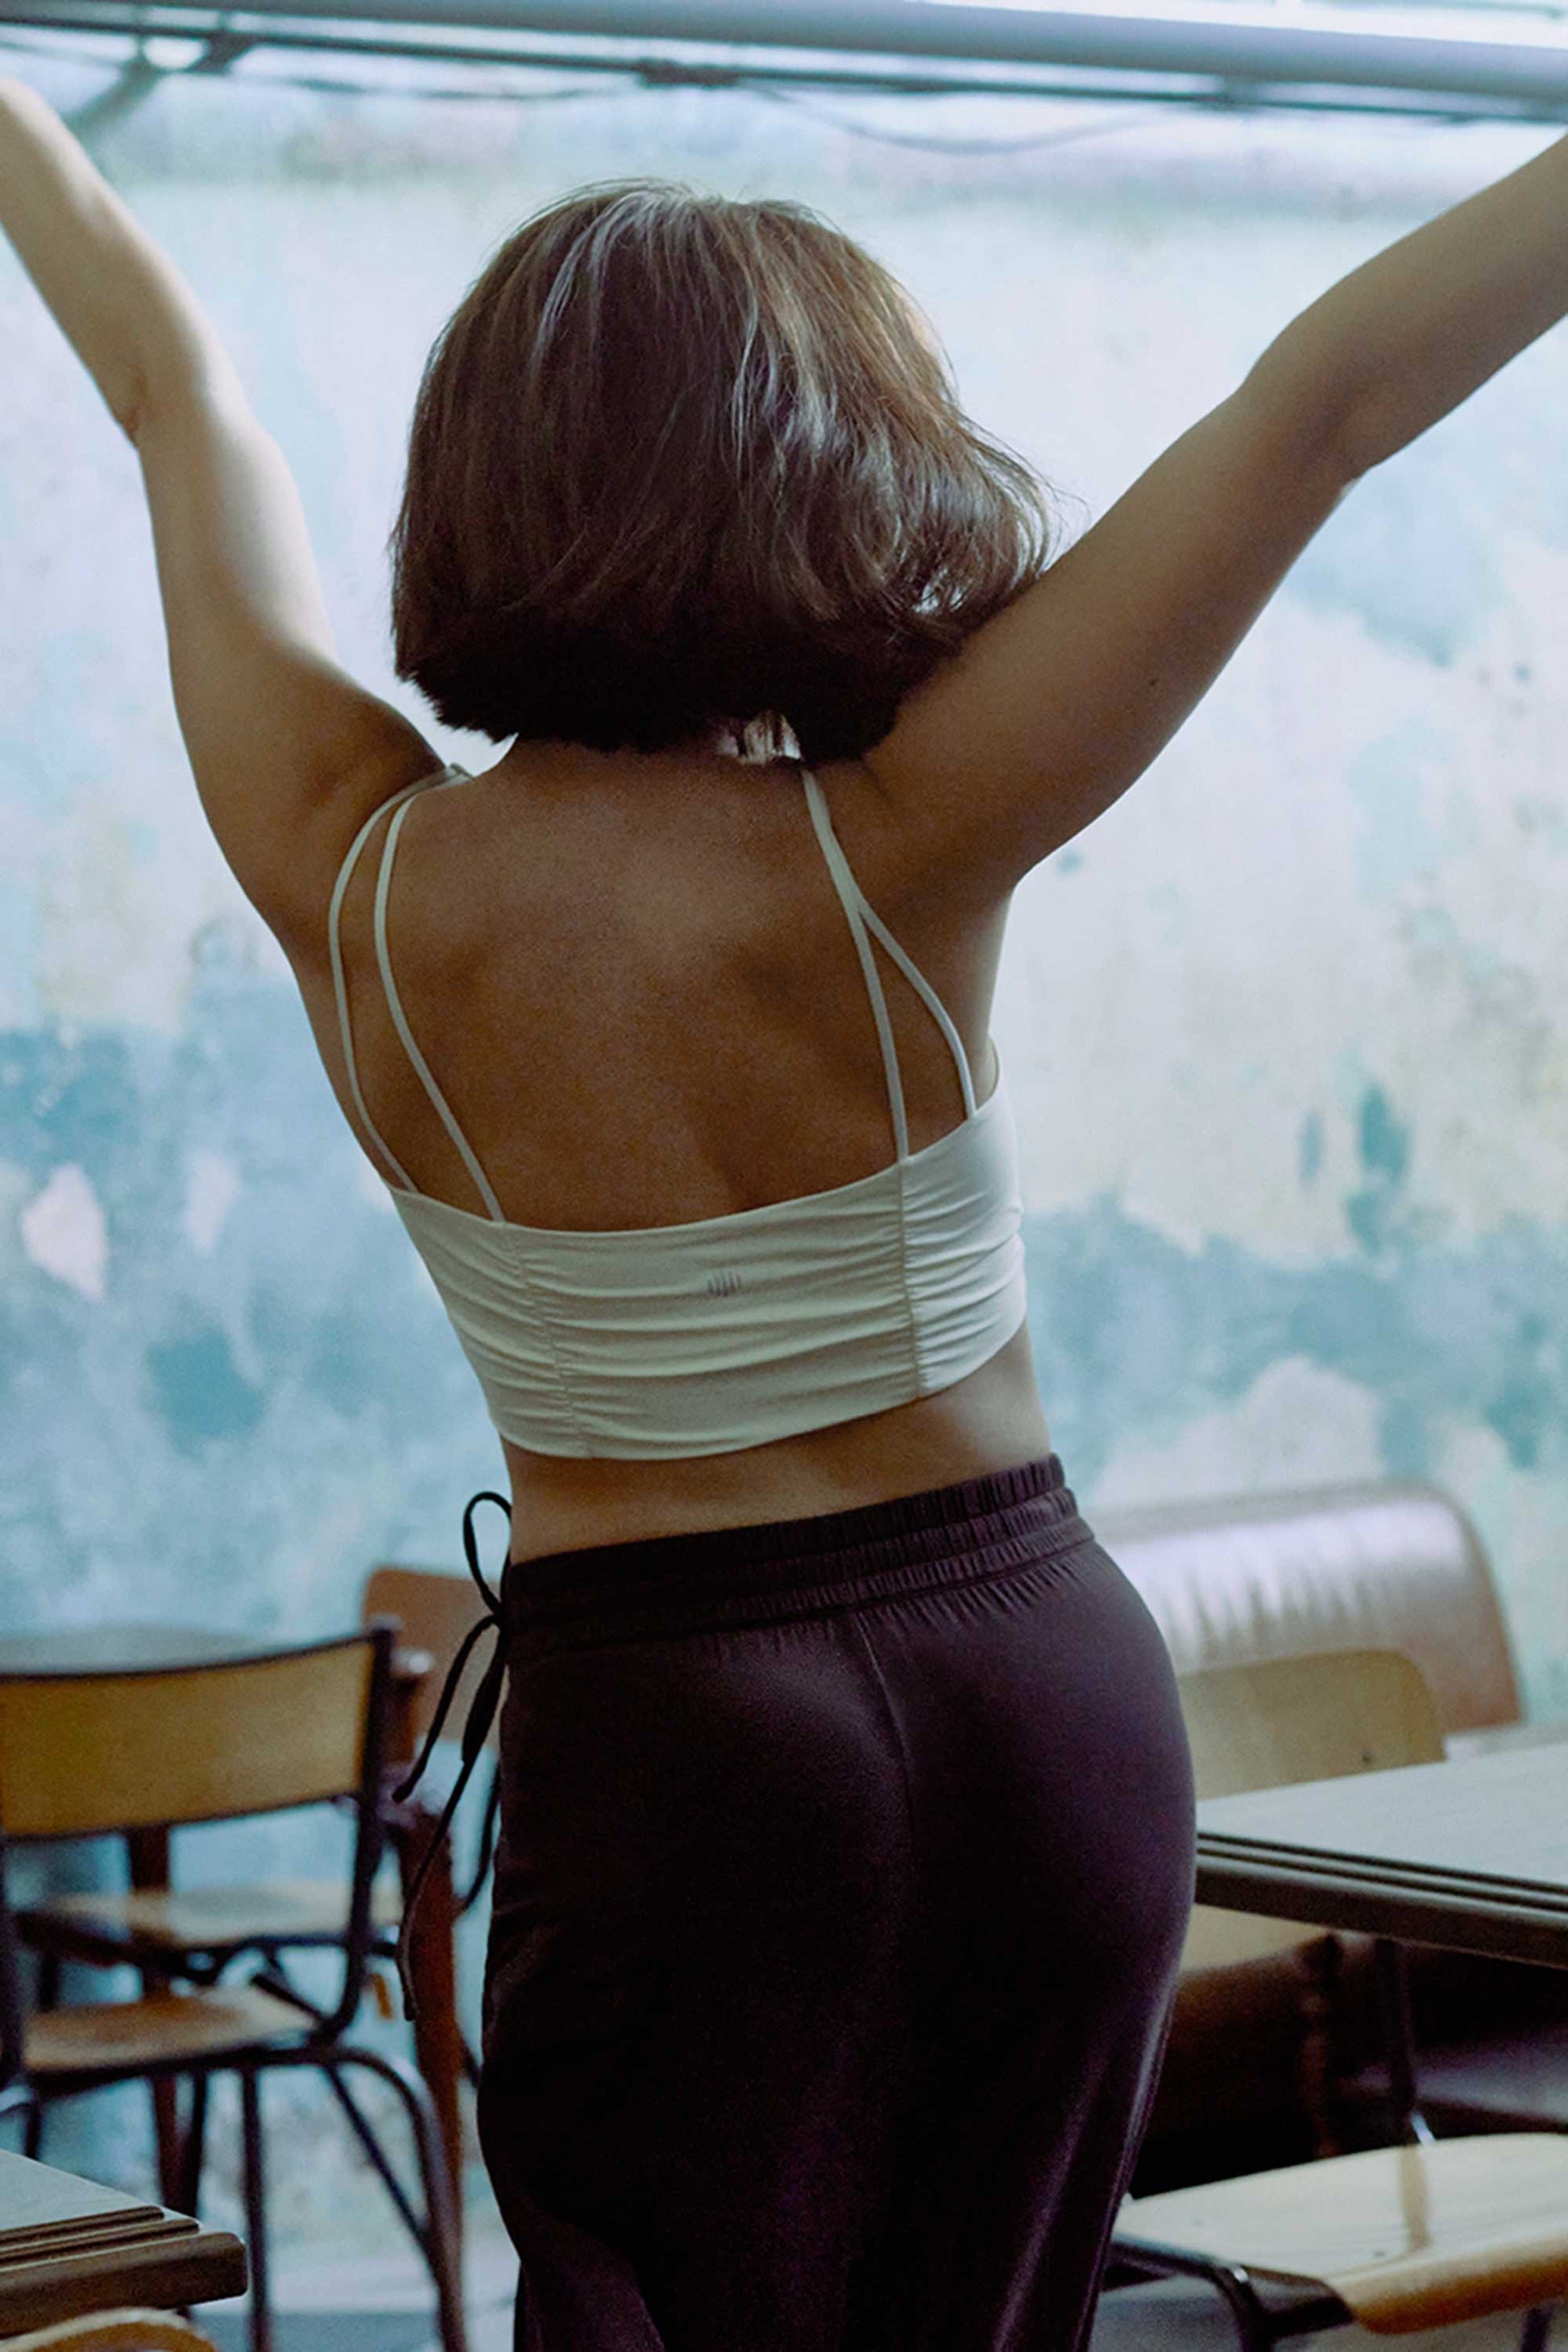 A back view of a woman wearing a white sports bra with pleats details.